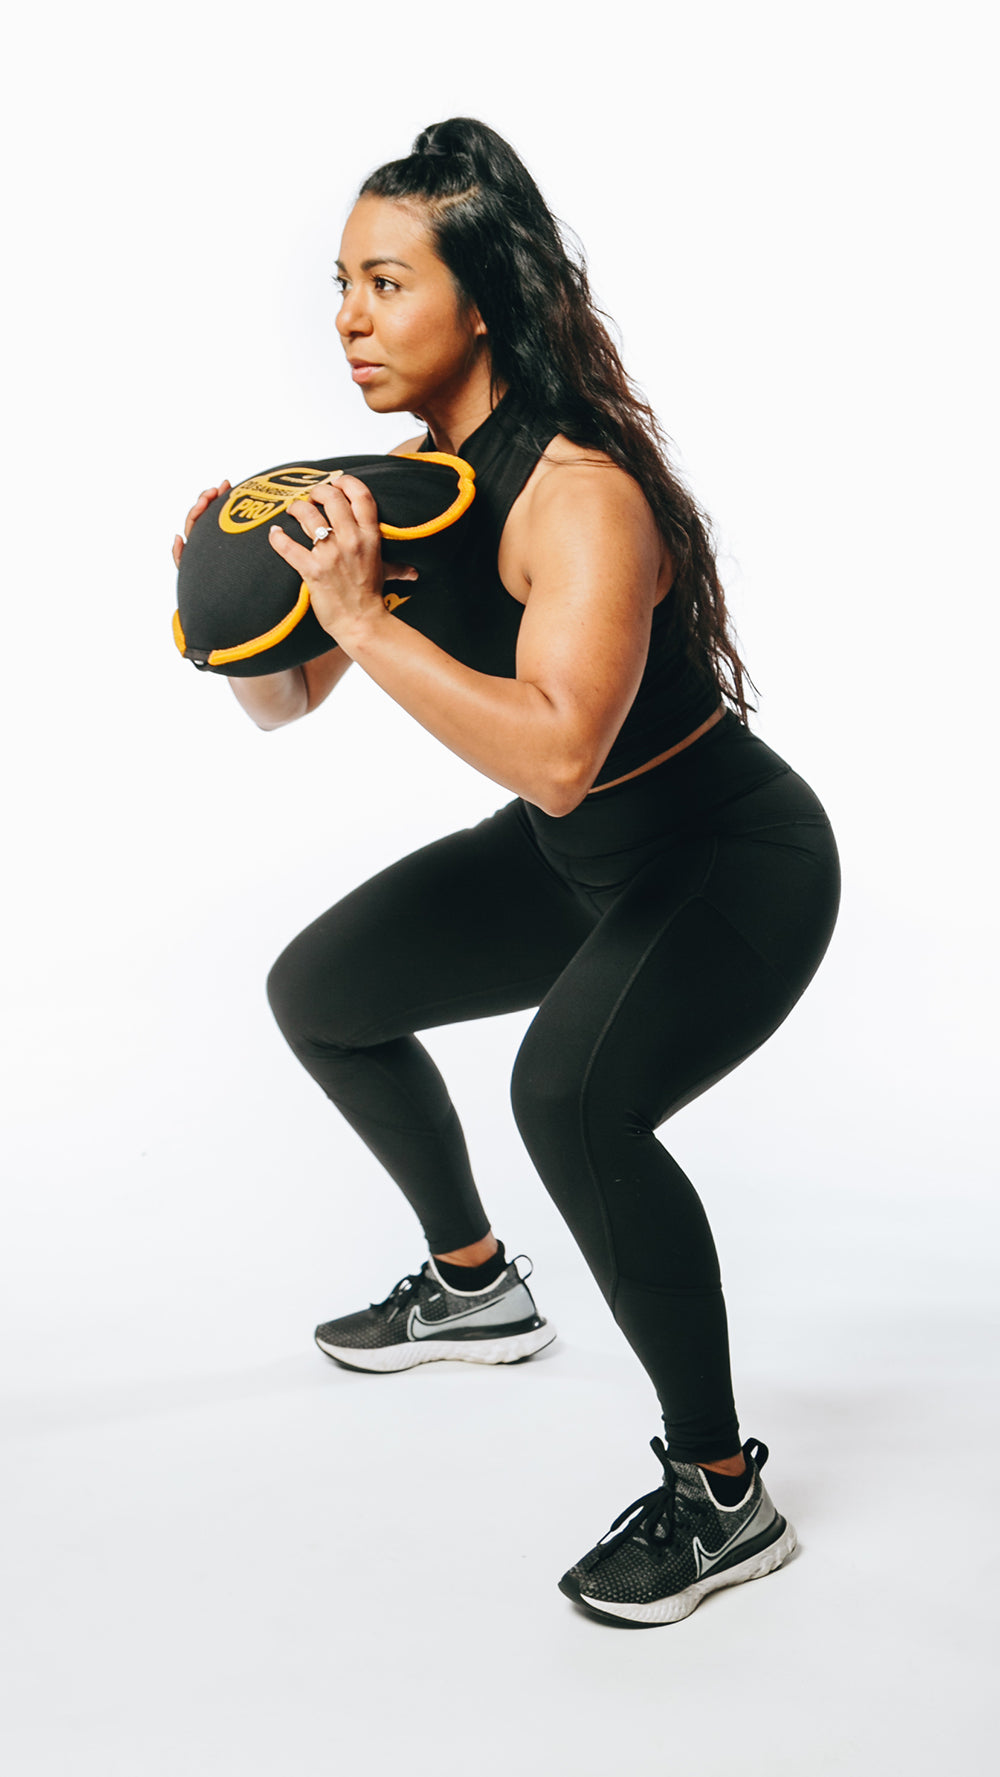 picture of a female fitness model doing sandbag loaded front squat exercise for functional strength